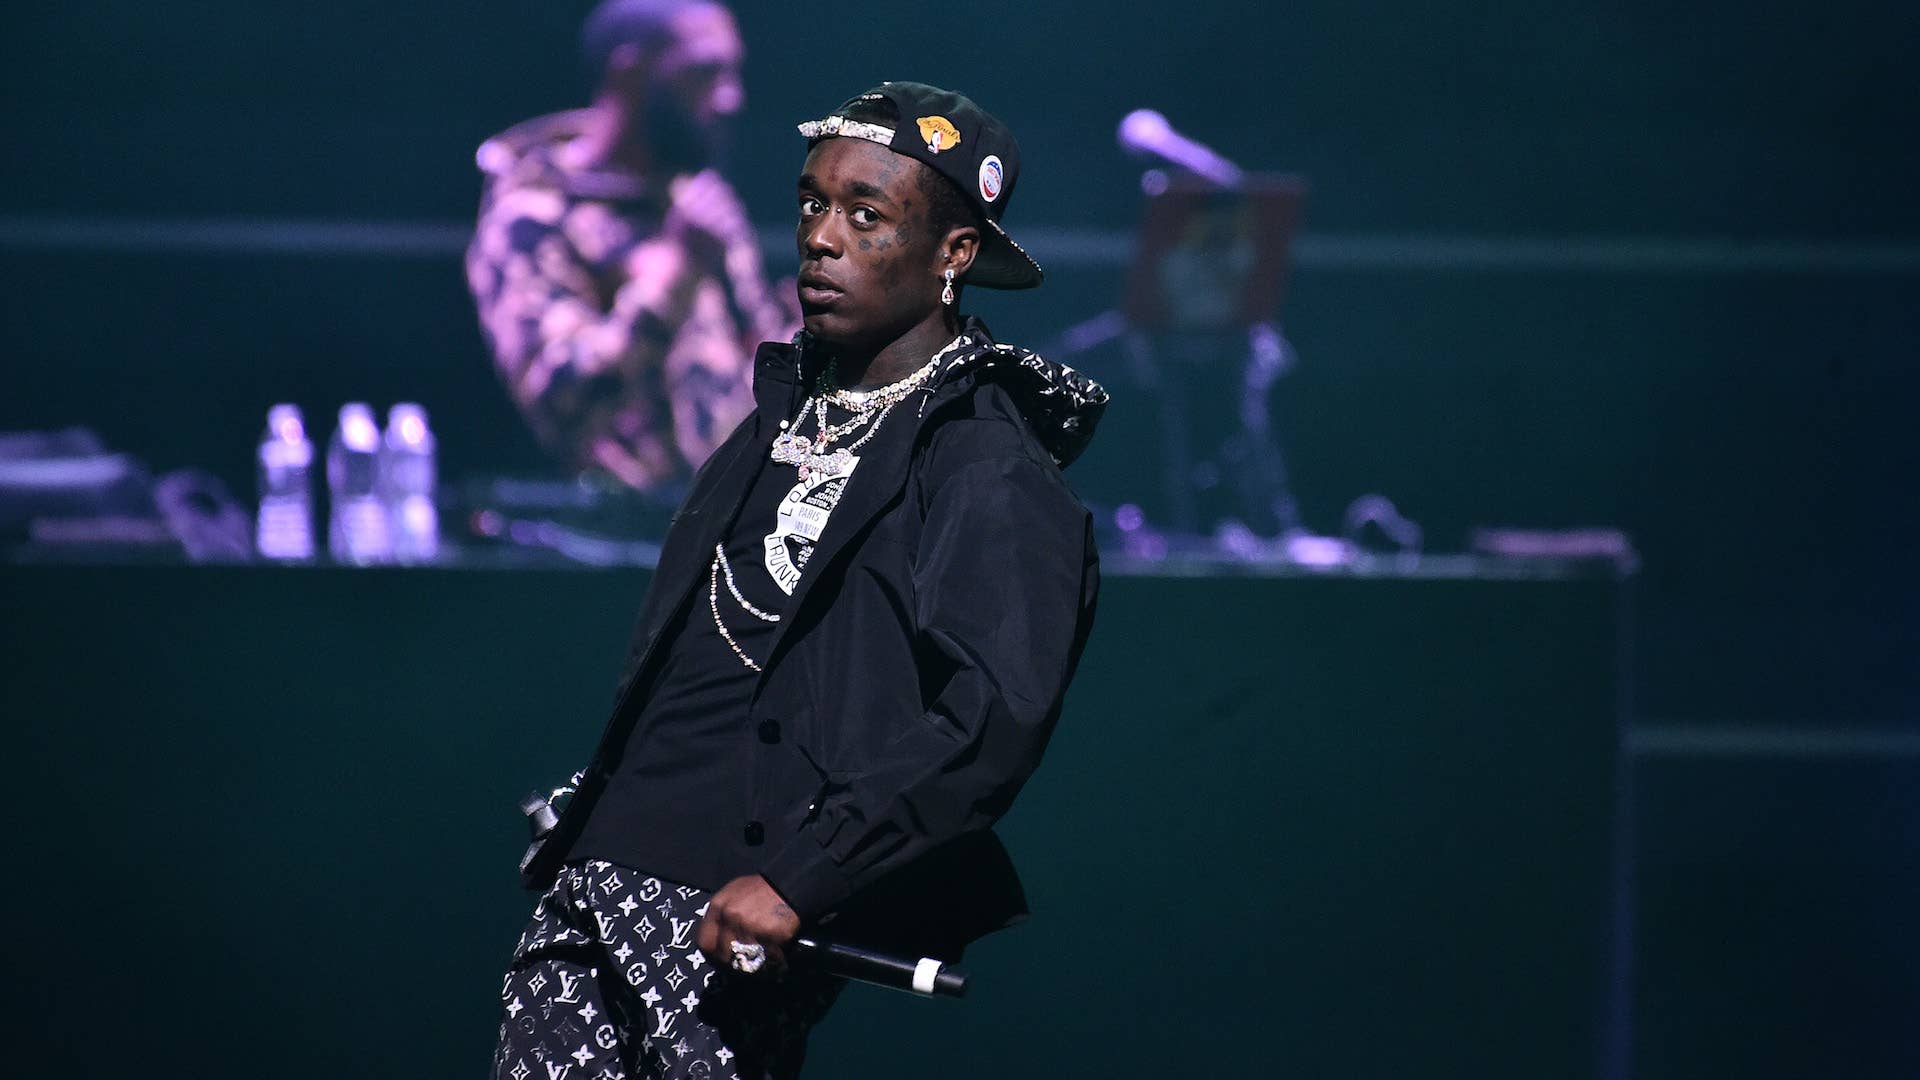 Lil Uzi Vert performs during the TIDAL's 5th Annual TIDAL X Benefit Concert